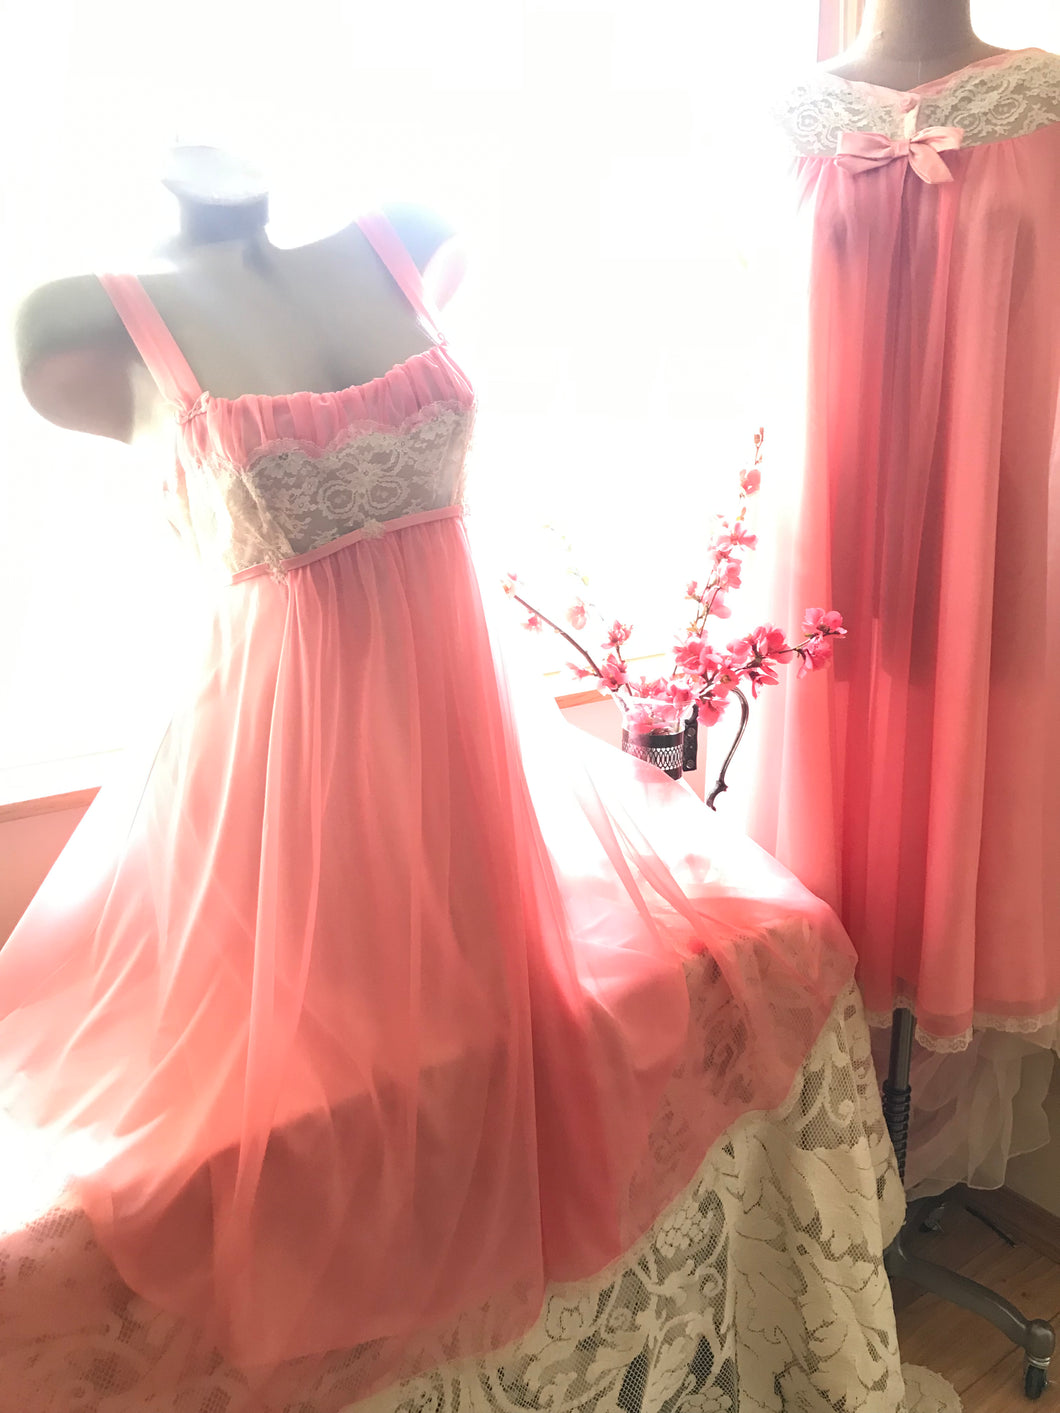 Authentic 1950’s coral pink chiffon peignoir nightgown and robe set